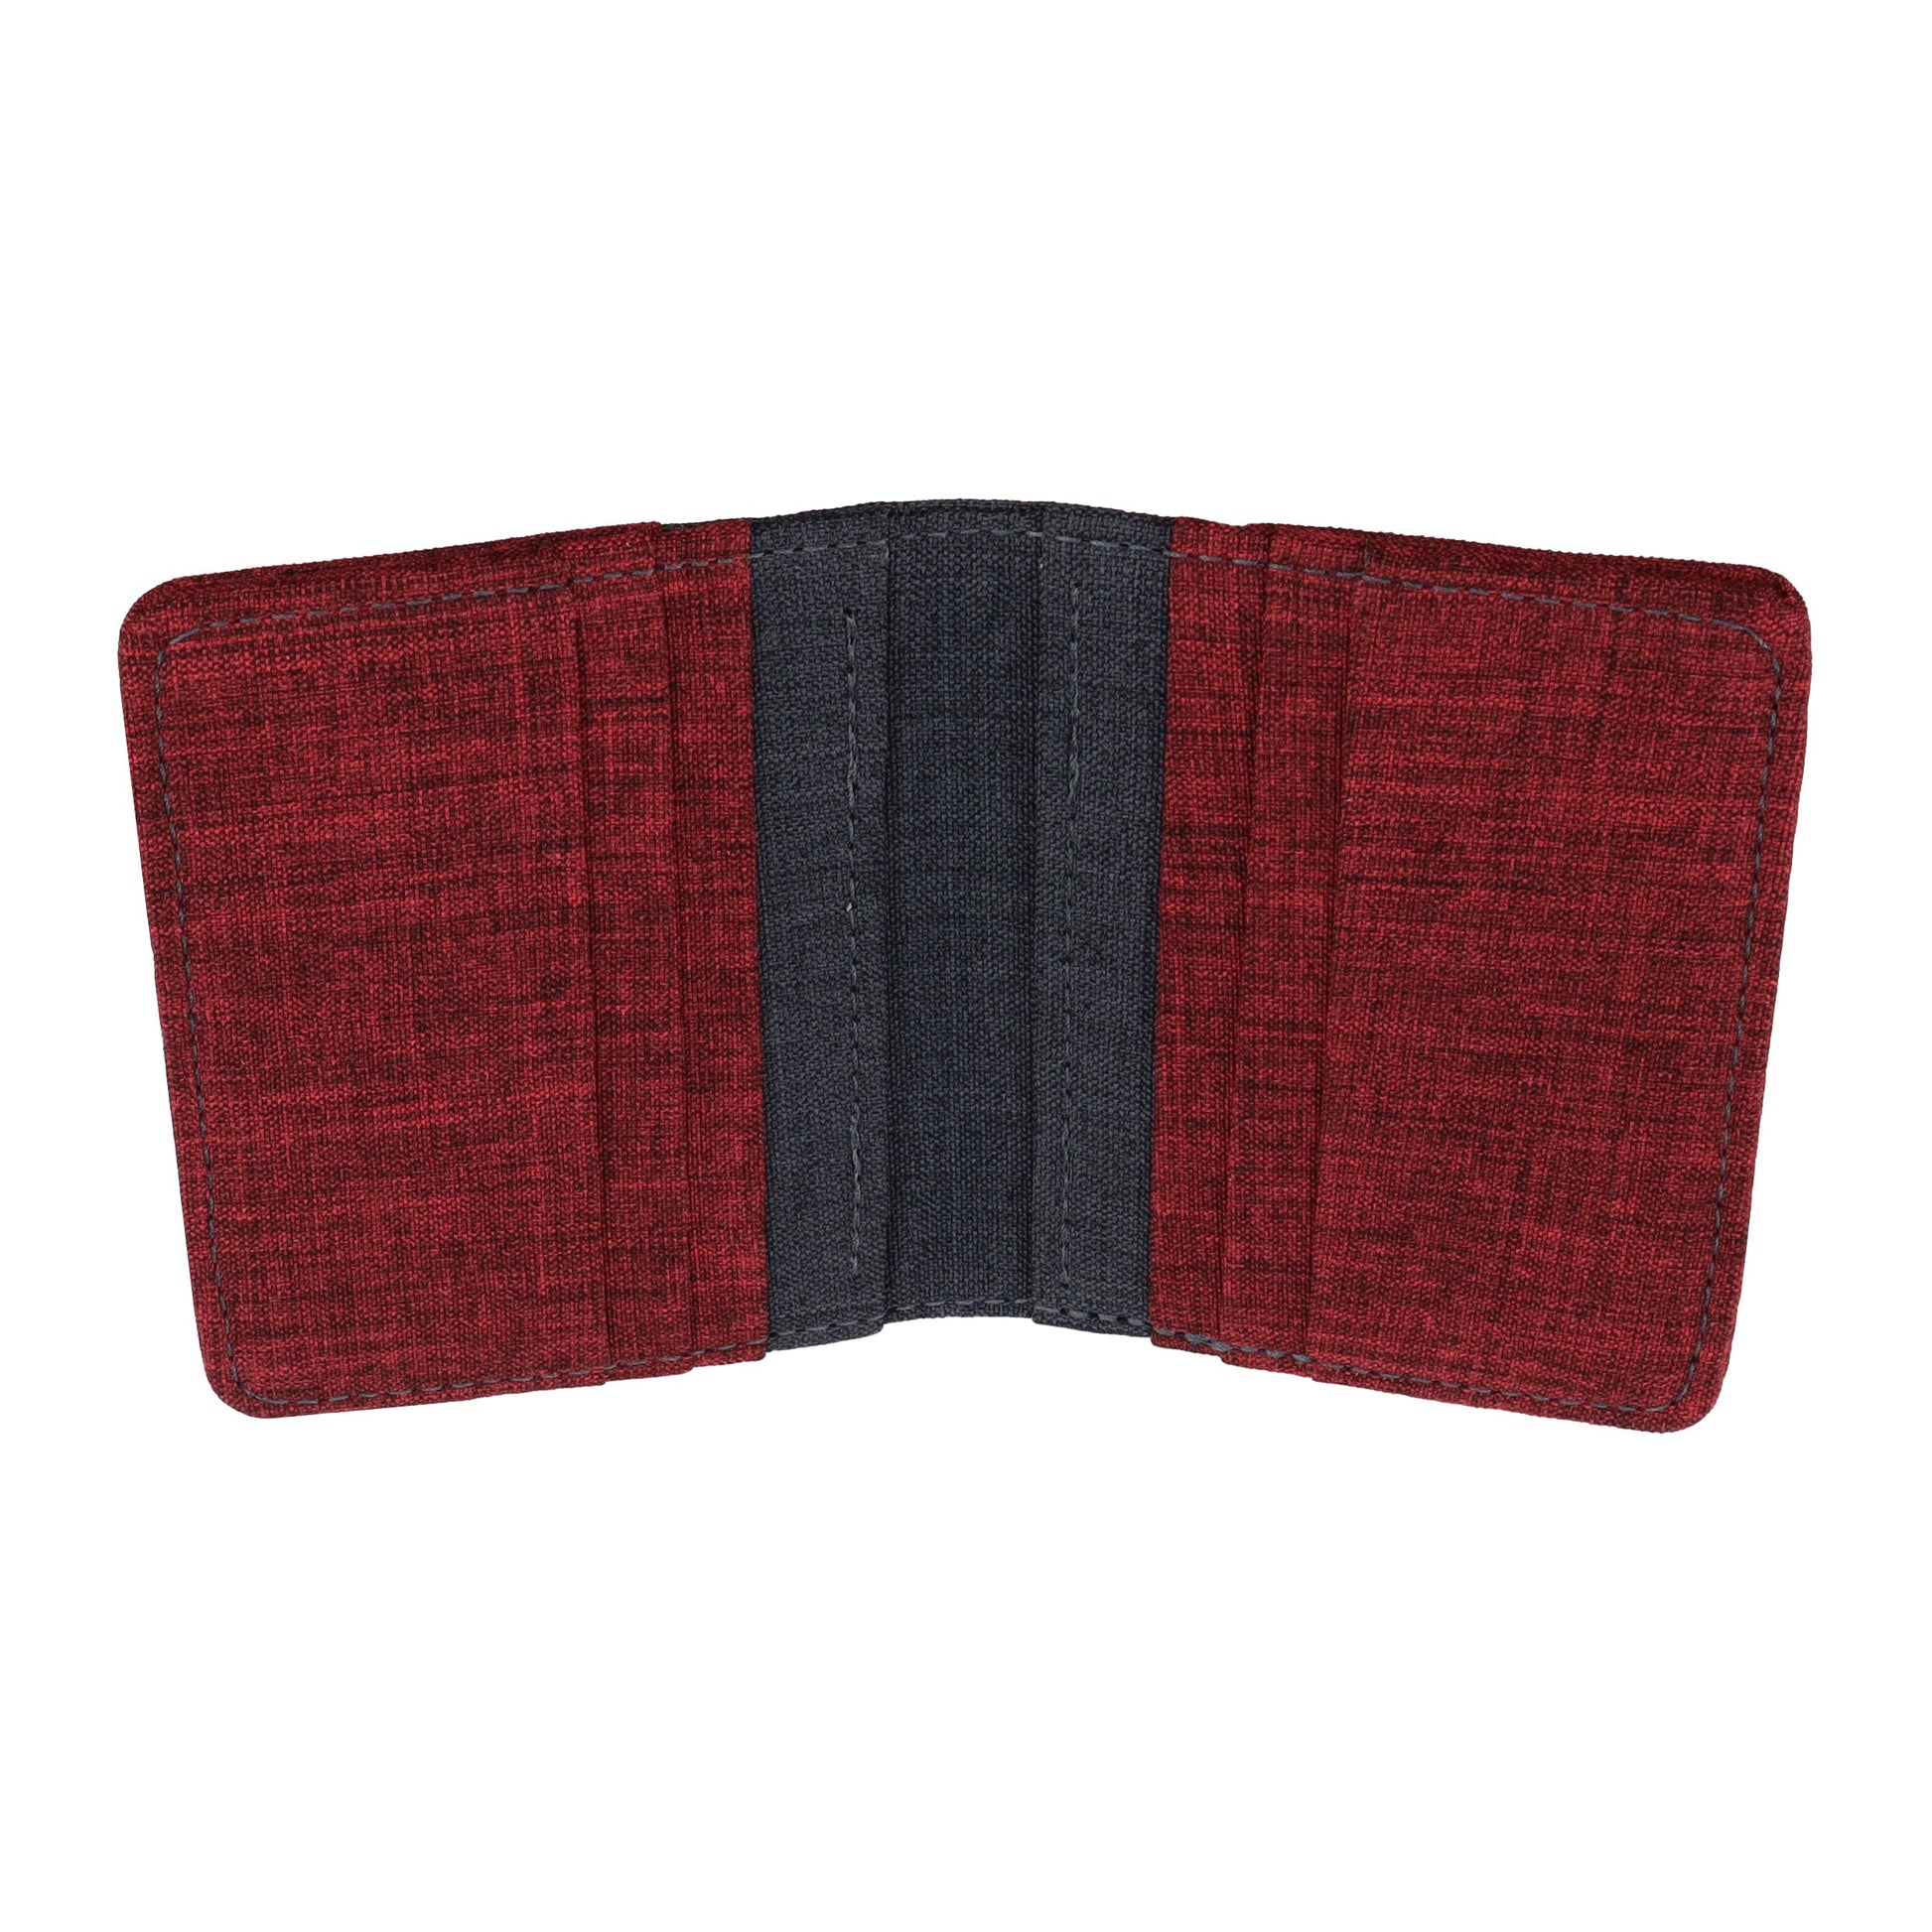 Red and Gray Vertical Bifold Wallet